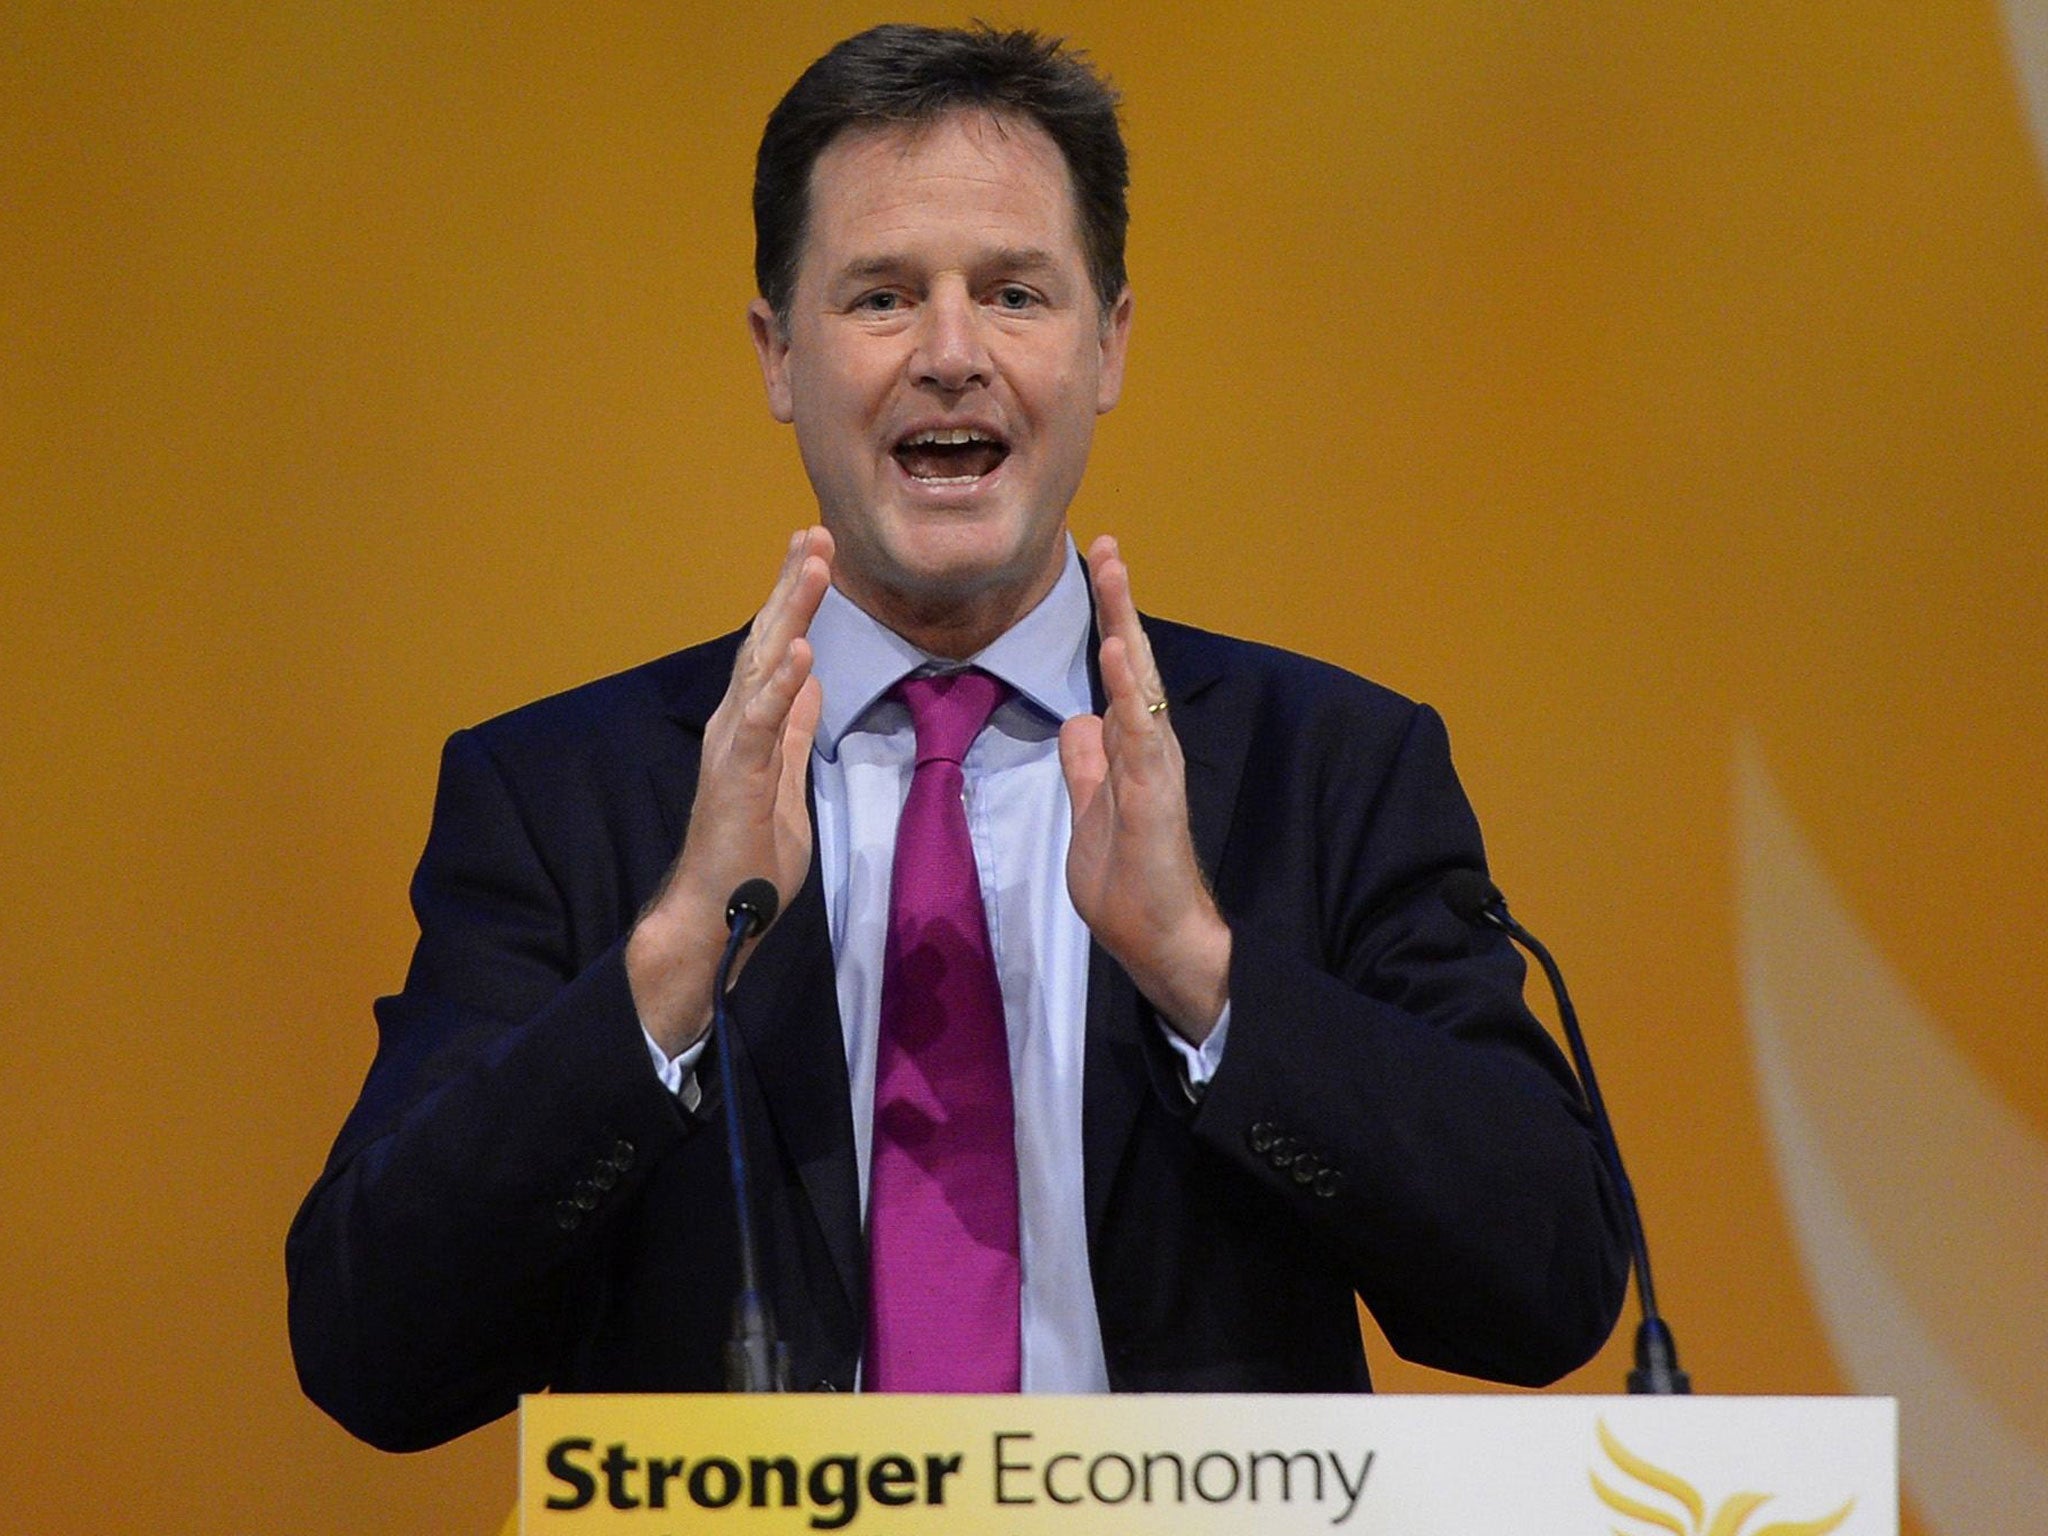 Deputy Prime Minister, and leader of the Liberal Democrats, Nick Clegg speaks at the party’s autumn conference in Glasgow